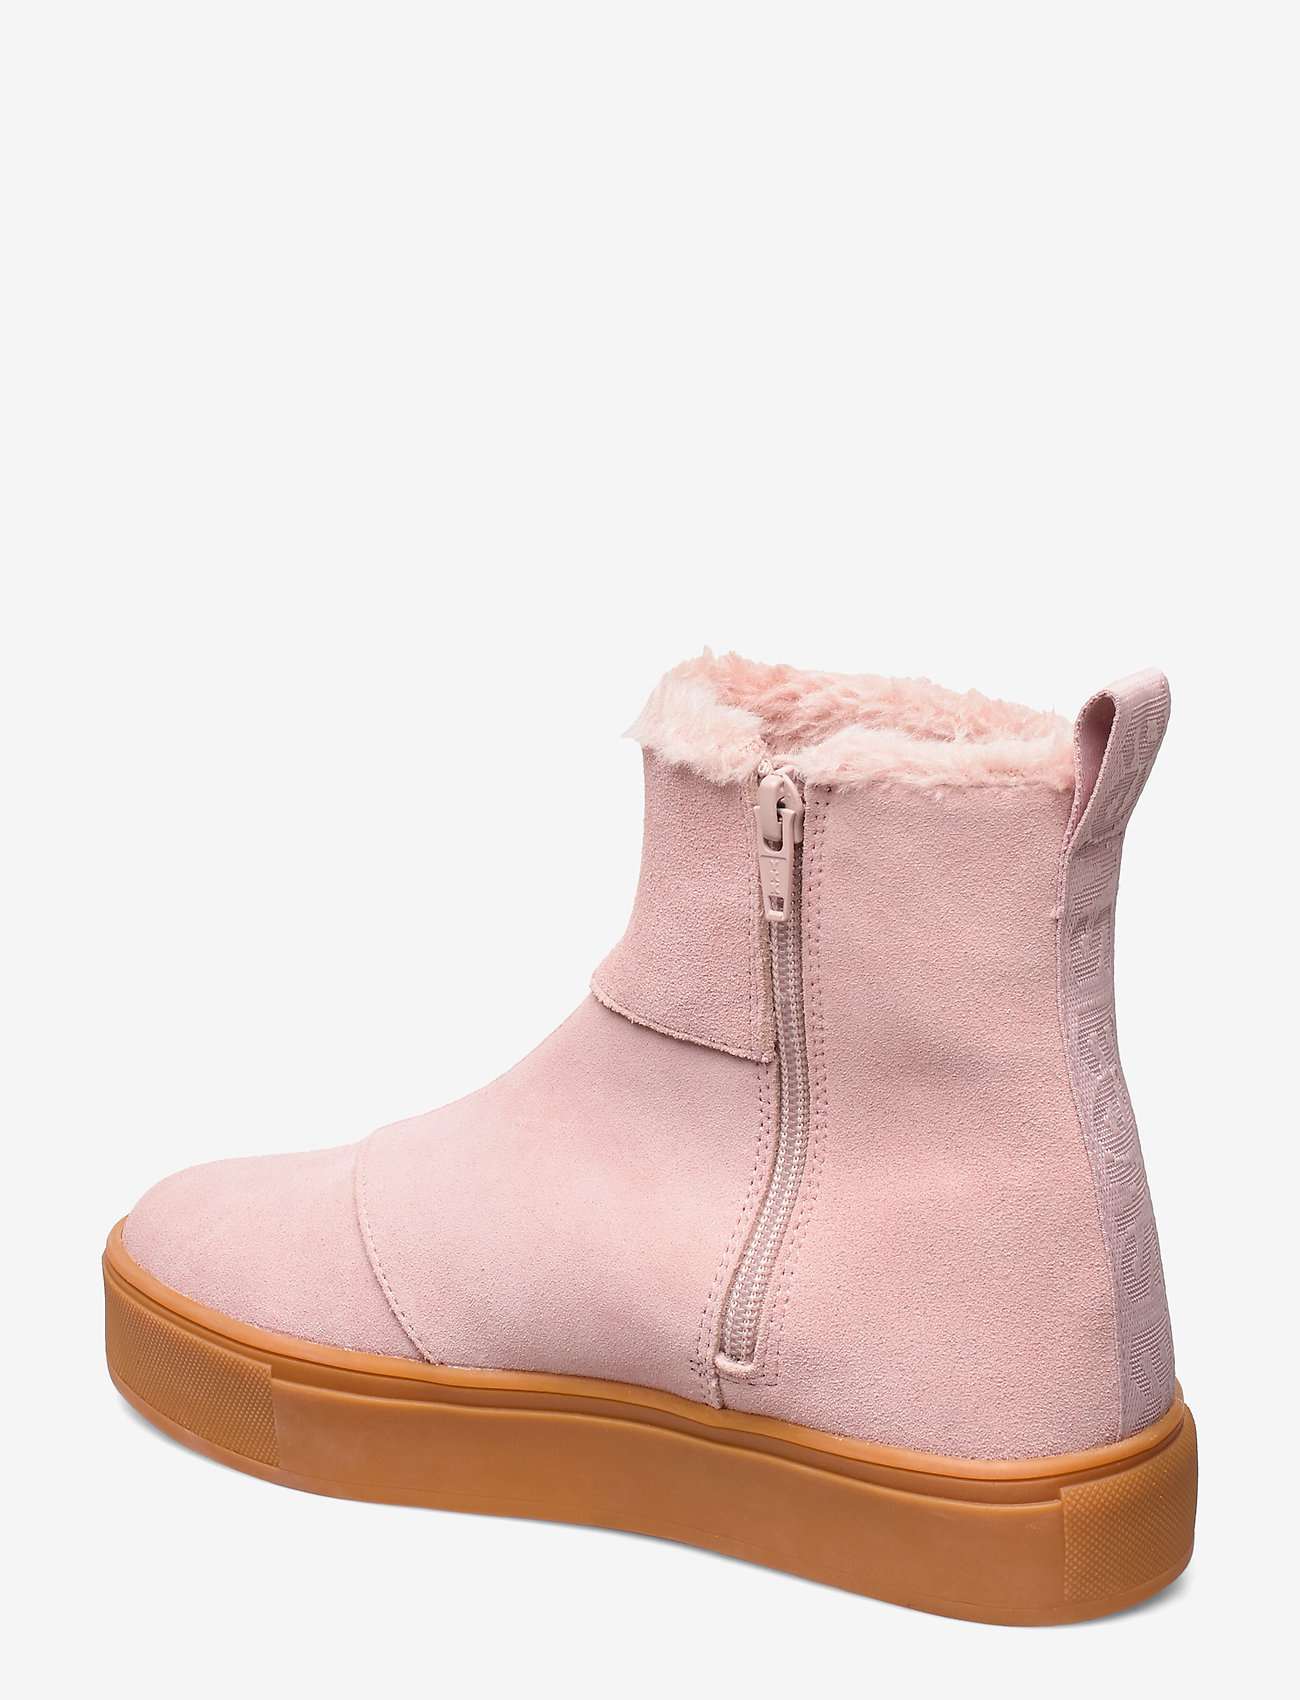 Svea - Suede / Pile Boots - flat ankle boots - soft pink - 1